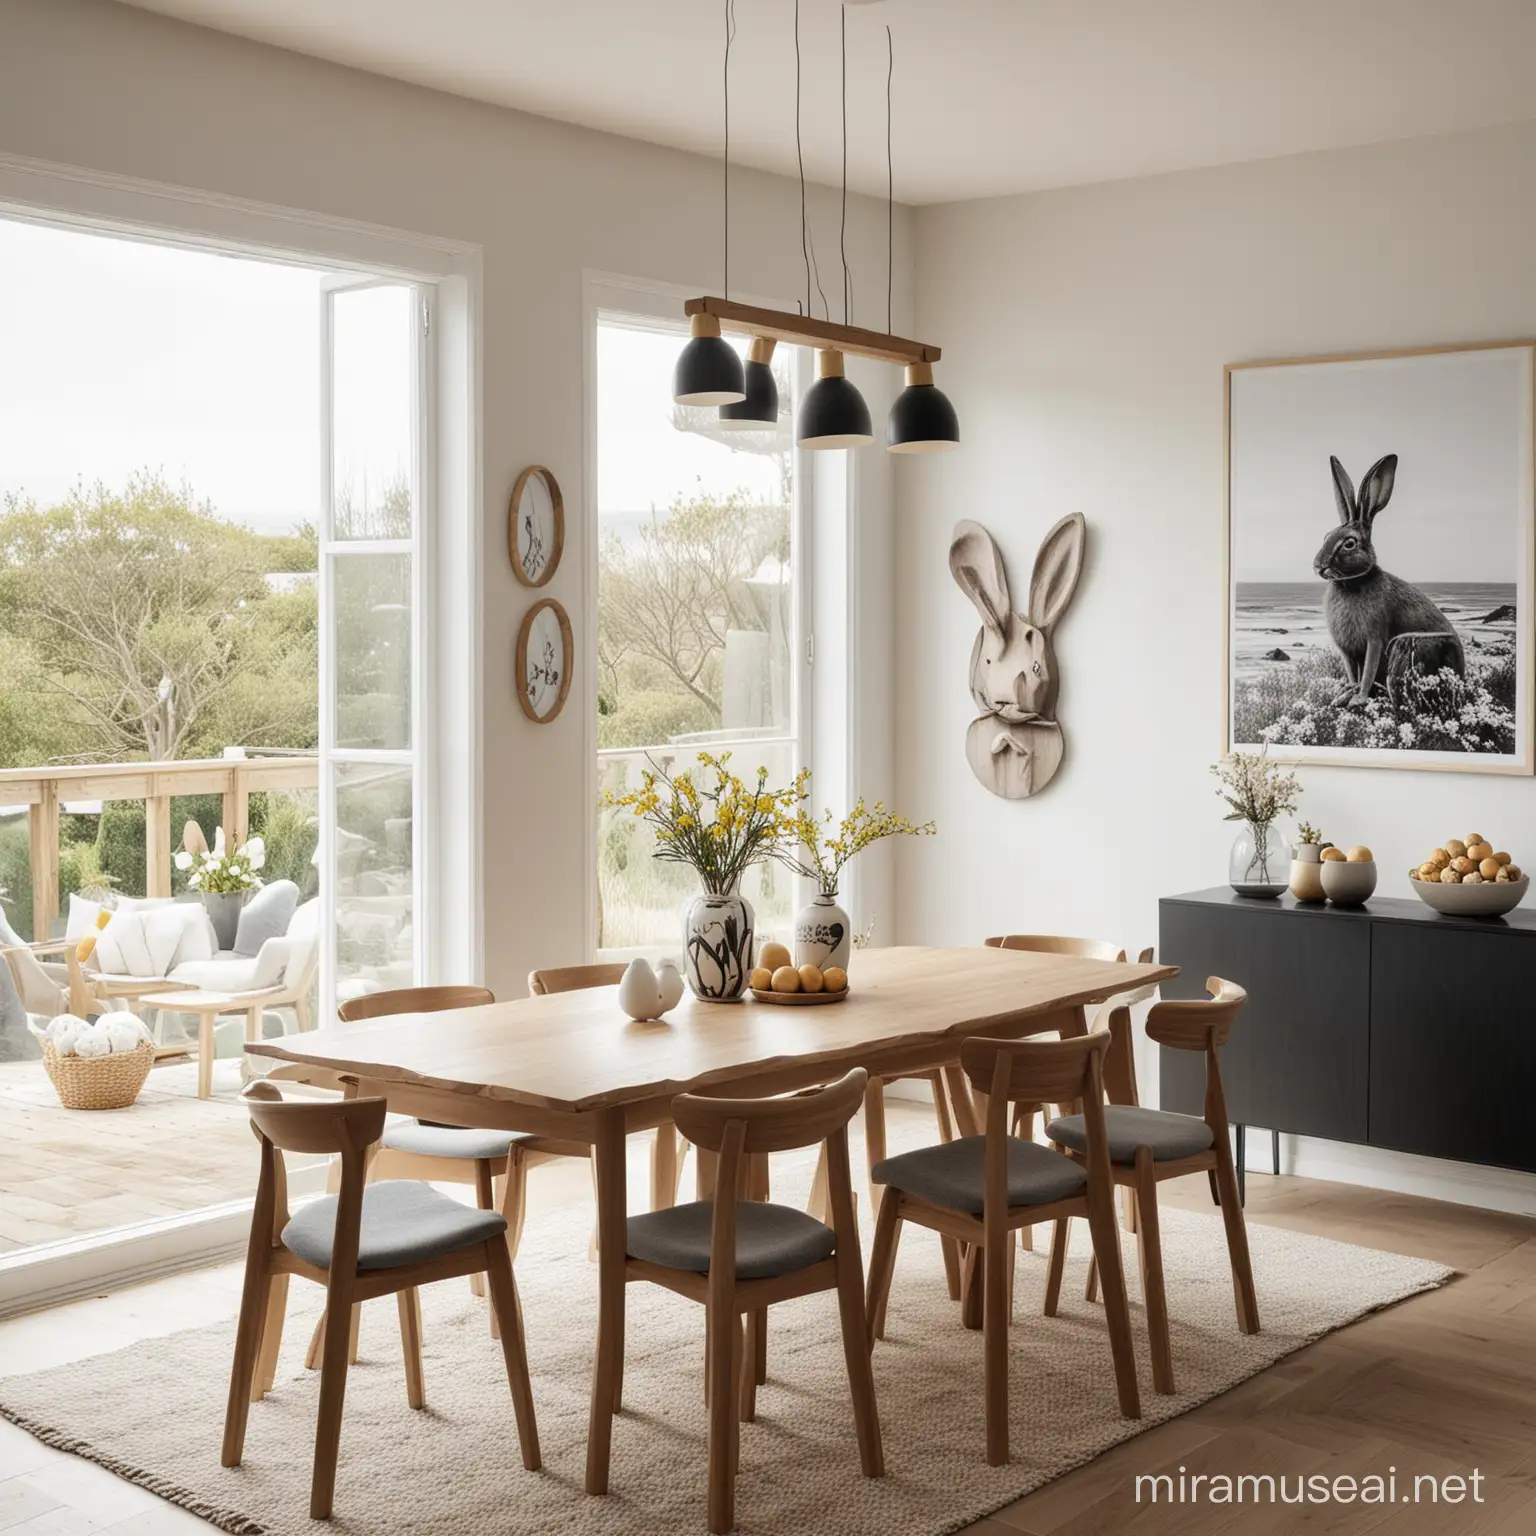 Contemporary Scandinavian Interior Dining Room with large 10 seater wooden table and chairs, beautiful table setting with feature vase in middle with Easter decorations hanging off it. Modern lady black and white print on wall. Easter Decorations, with golden eggs and bunnies. Large Window looking out to the beach with lots of natural light.